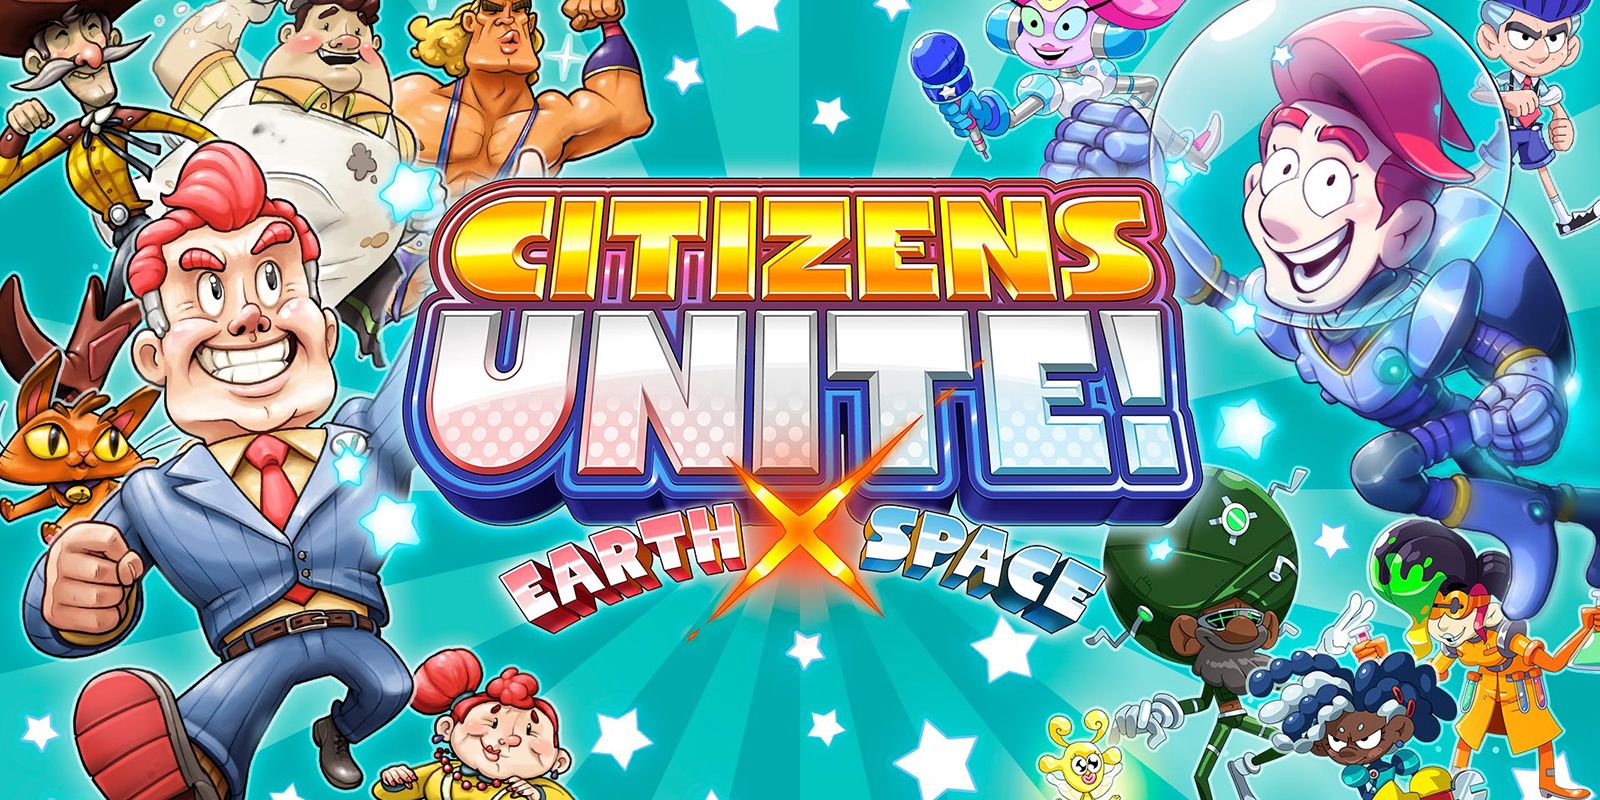 Citizens Unite Earth X Space Review